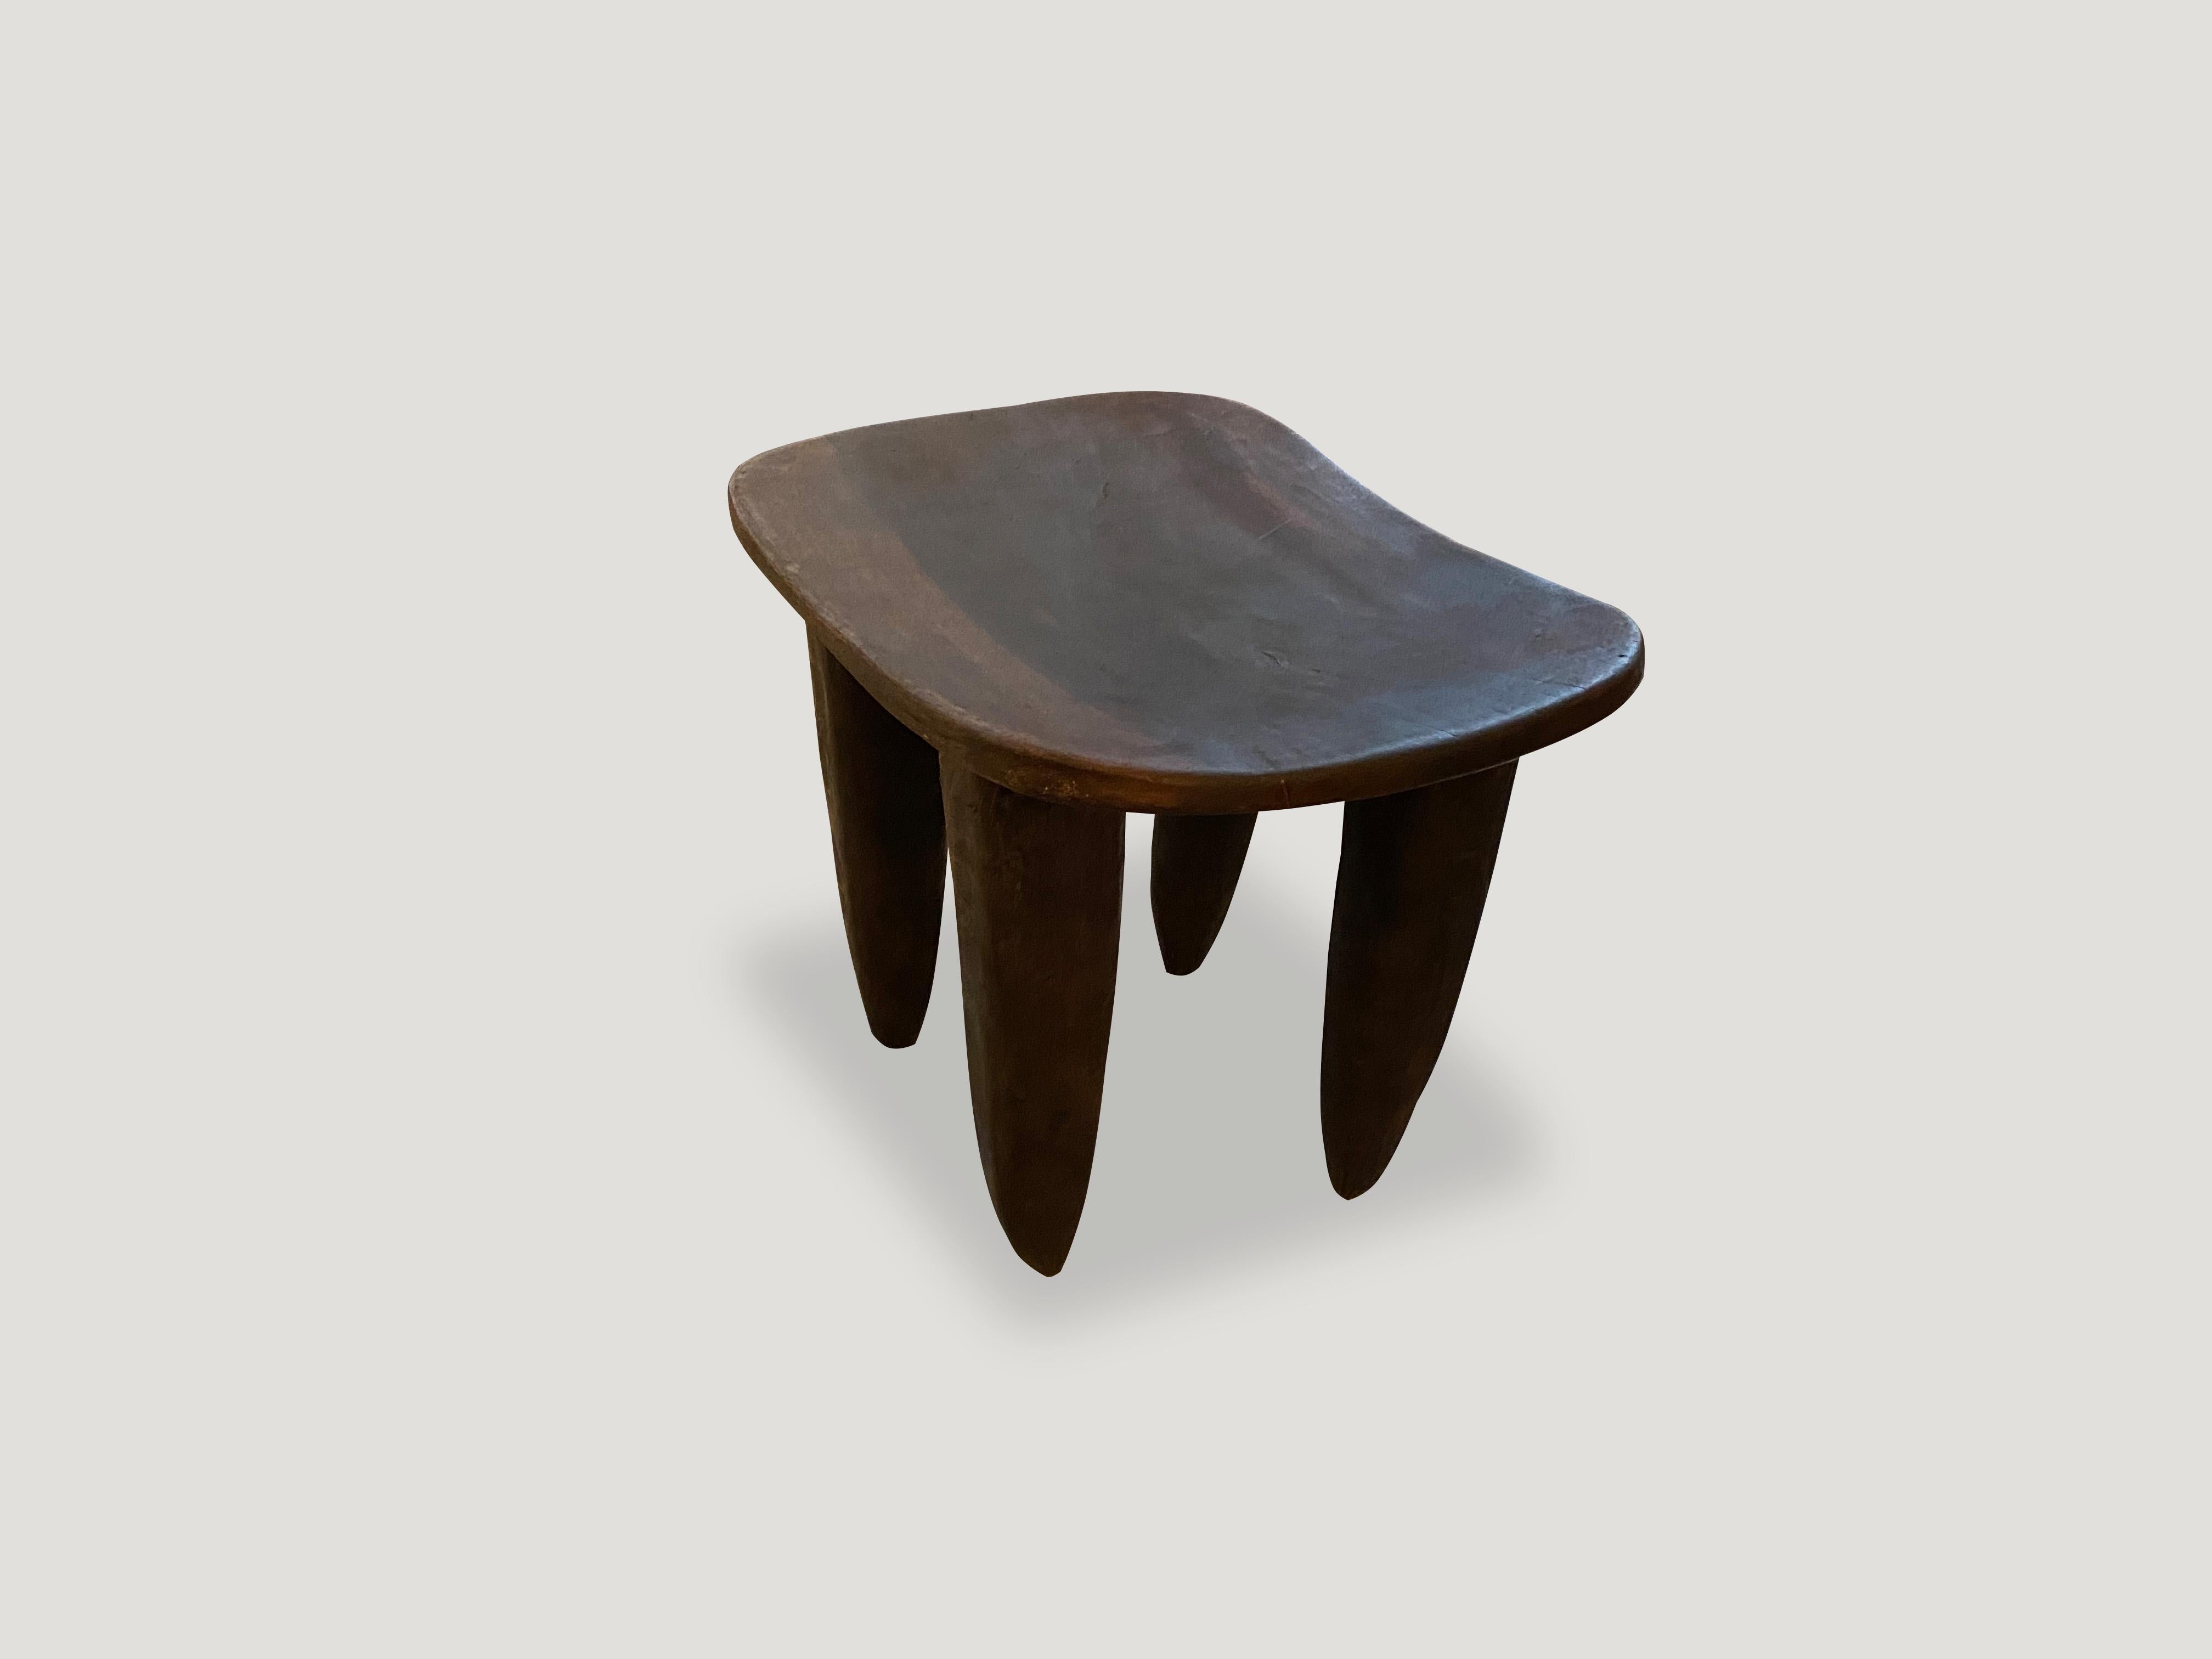 Tribal Andrianna Shamaris Senufo Stool or Bench from Cote d'Ivoire